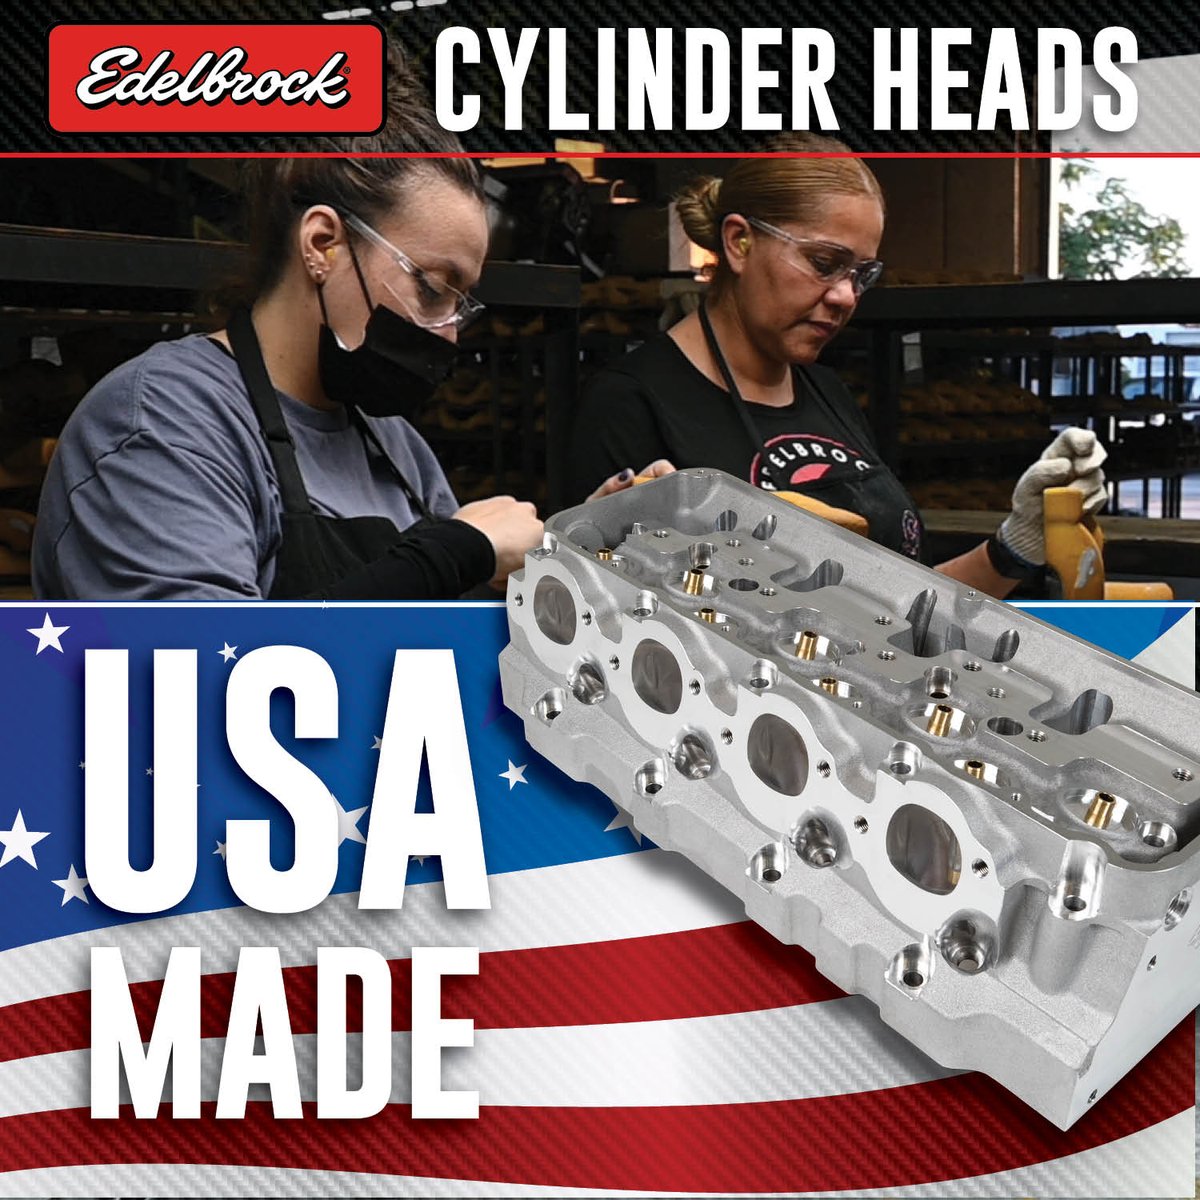 Reliability and Performance, sourced and built right her in the USA!!!
#edelbrock #edelbrockperformance
#racing #builtinusa #performance #autoracing #gofast